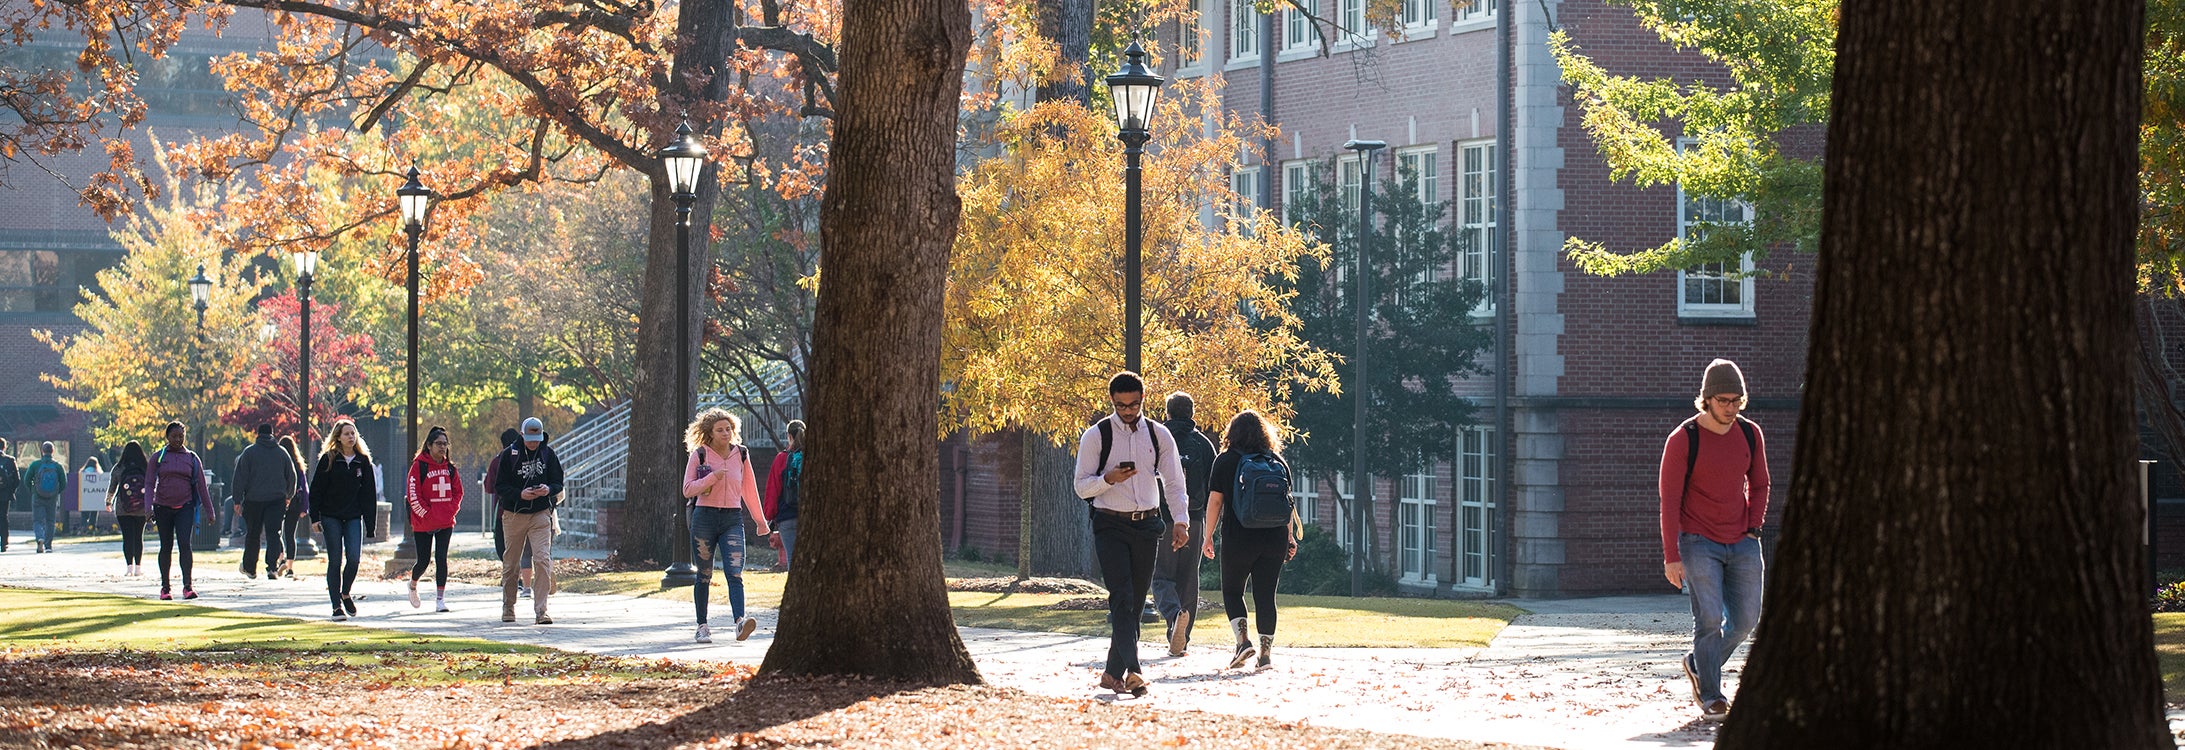 The $5 million gift is a significant step toward ECU’s comprehensive fundraising campaign that now totals more than $200 million.